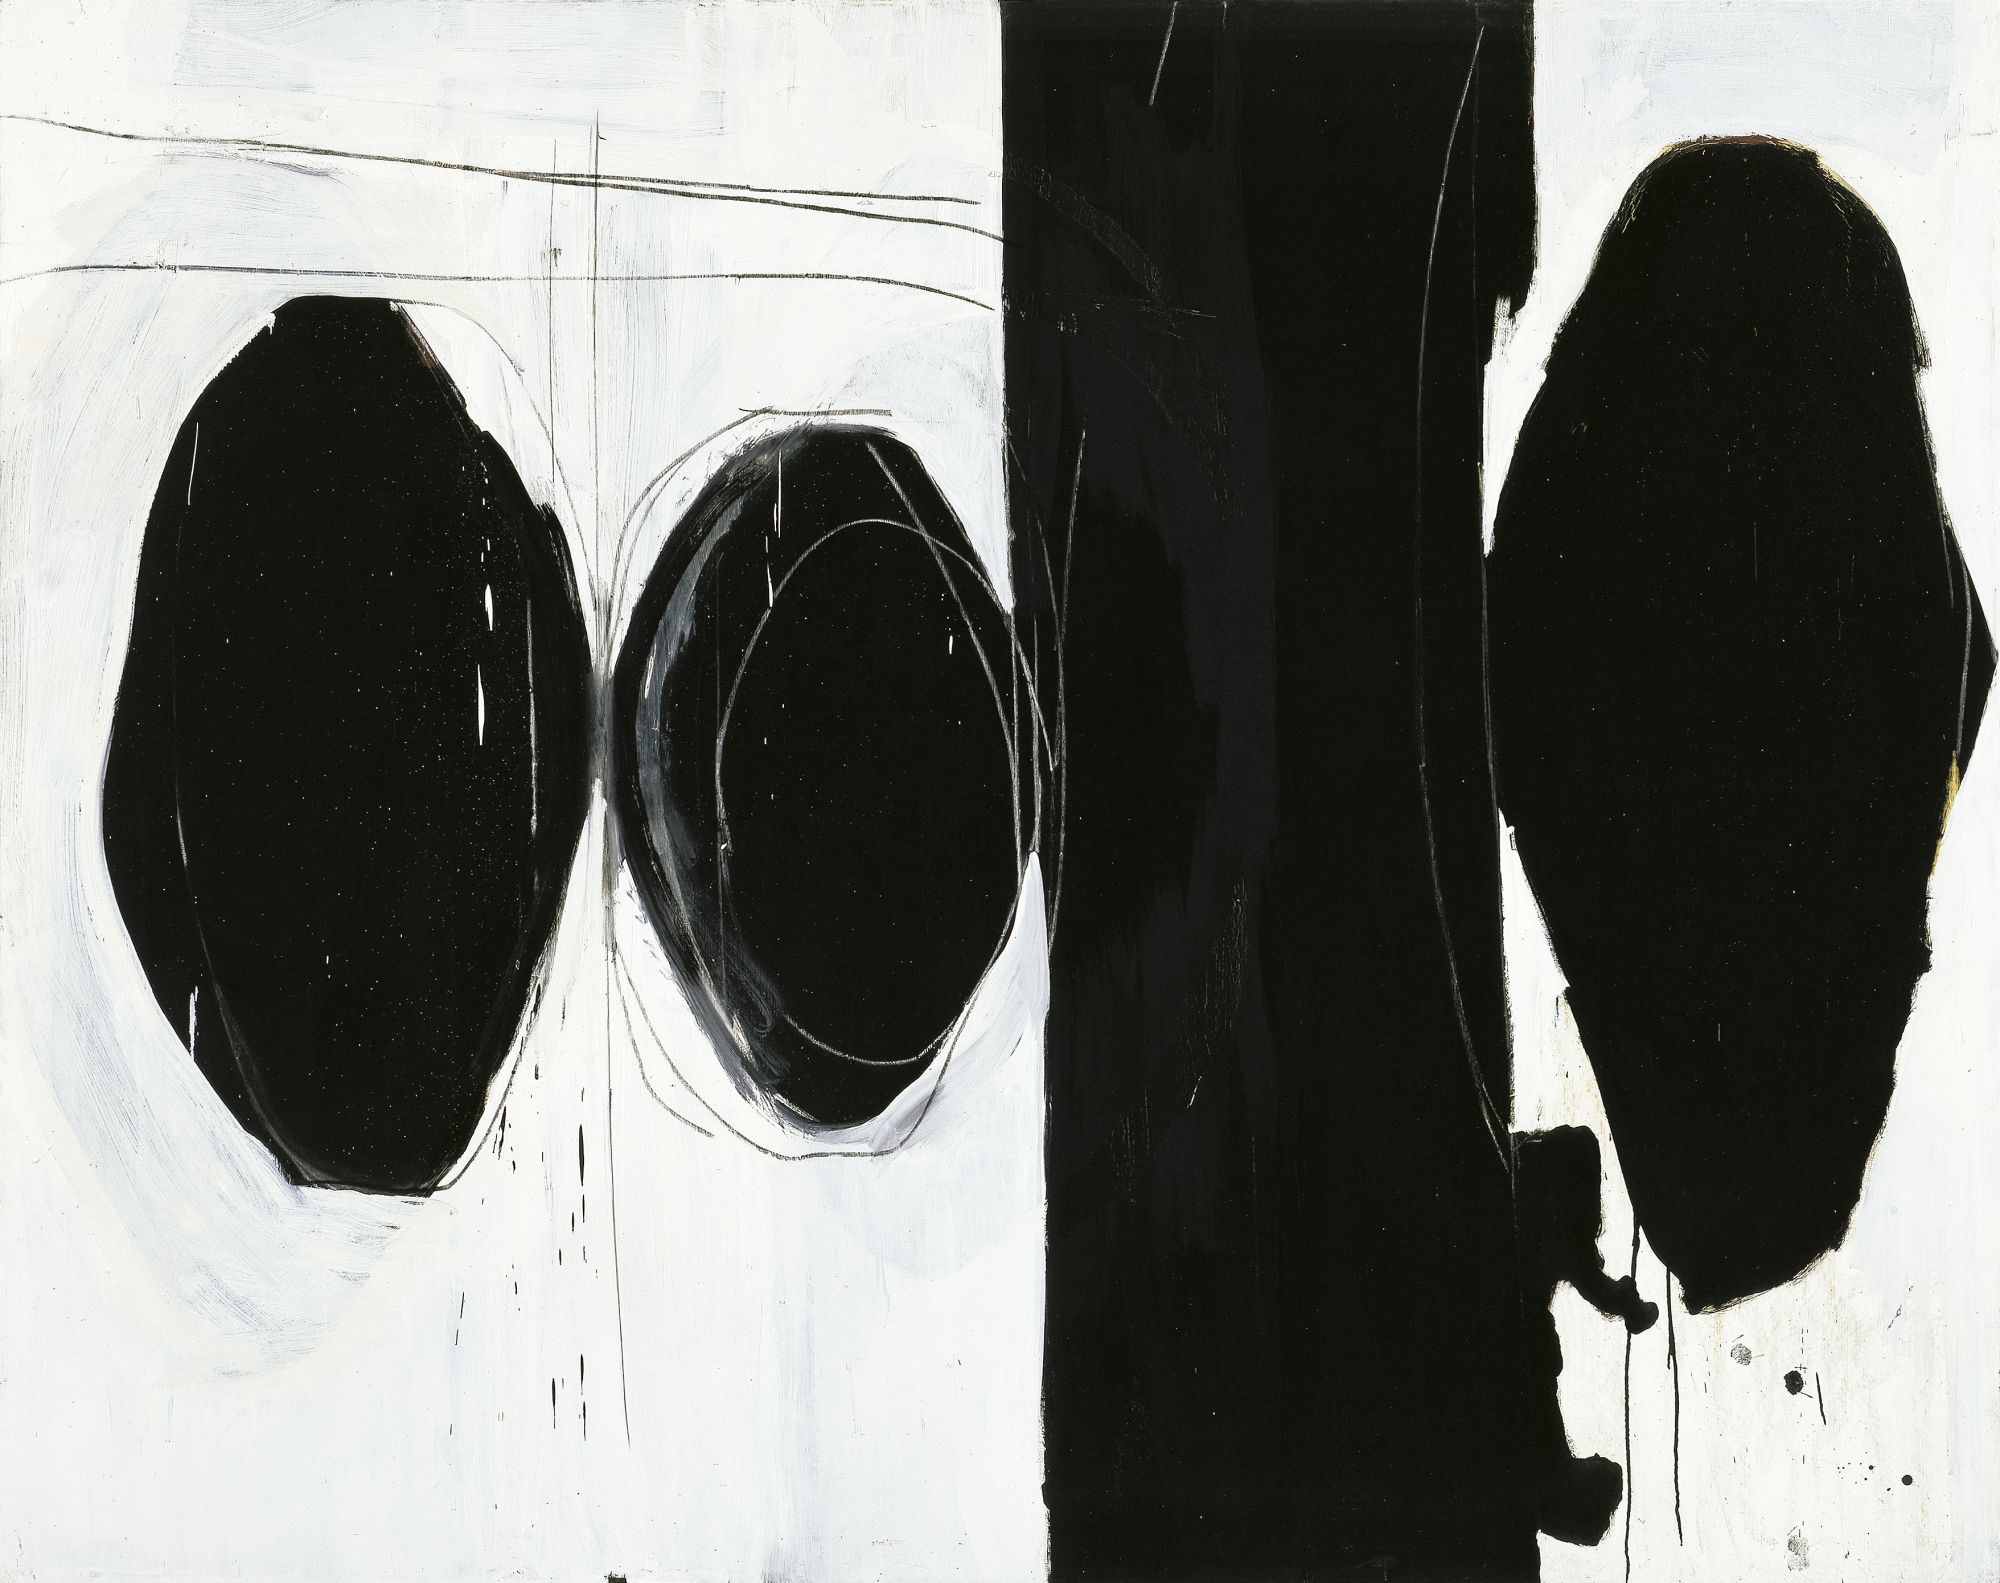 Elegy to the Spanish Republic, 1961, oil and charcoal on canvas, 68 ✕ 99 1/2 in. (172.7 ✕ 252.7 cm)